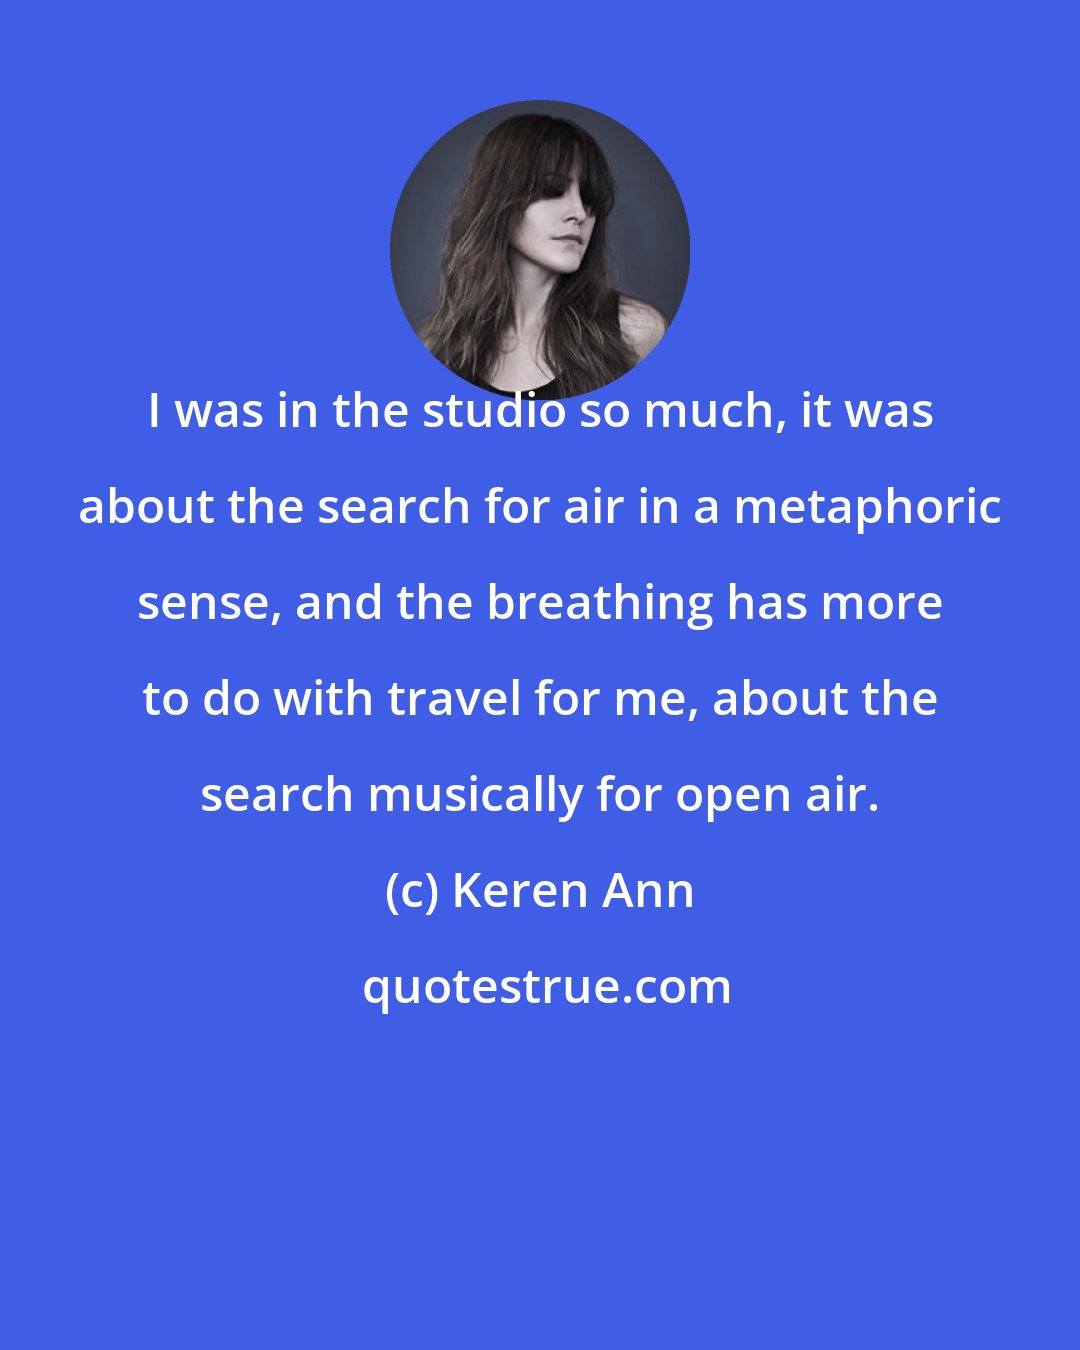 Keren Ann: I was in the studio so much, it was about the search for air in a metaphoric sense, and the breathing has more to do with travel for me, about the search musically for open air.